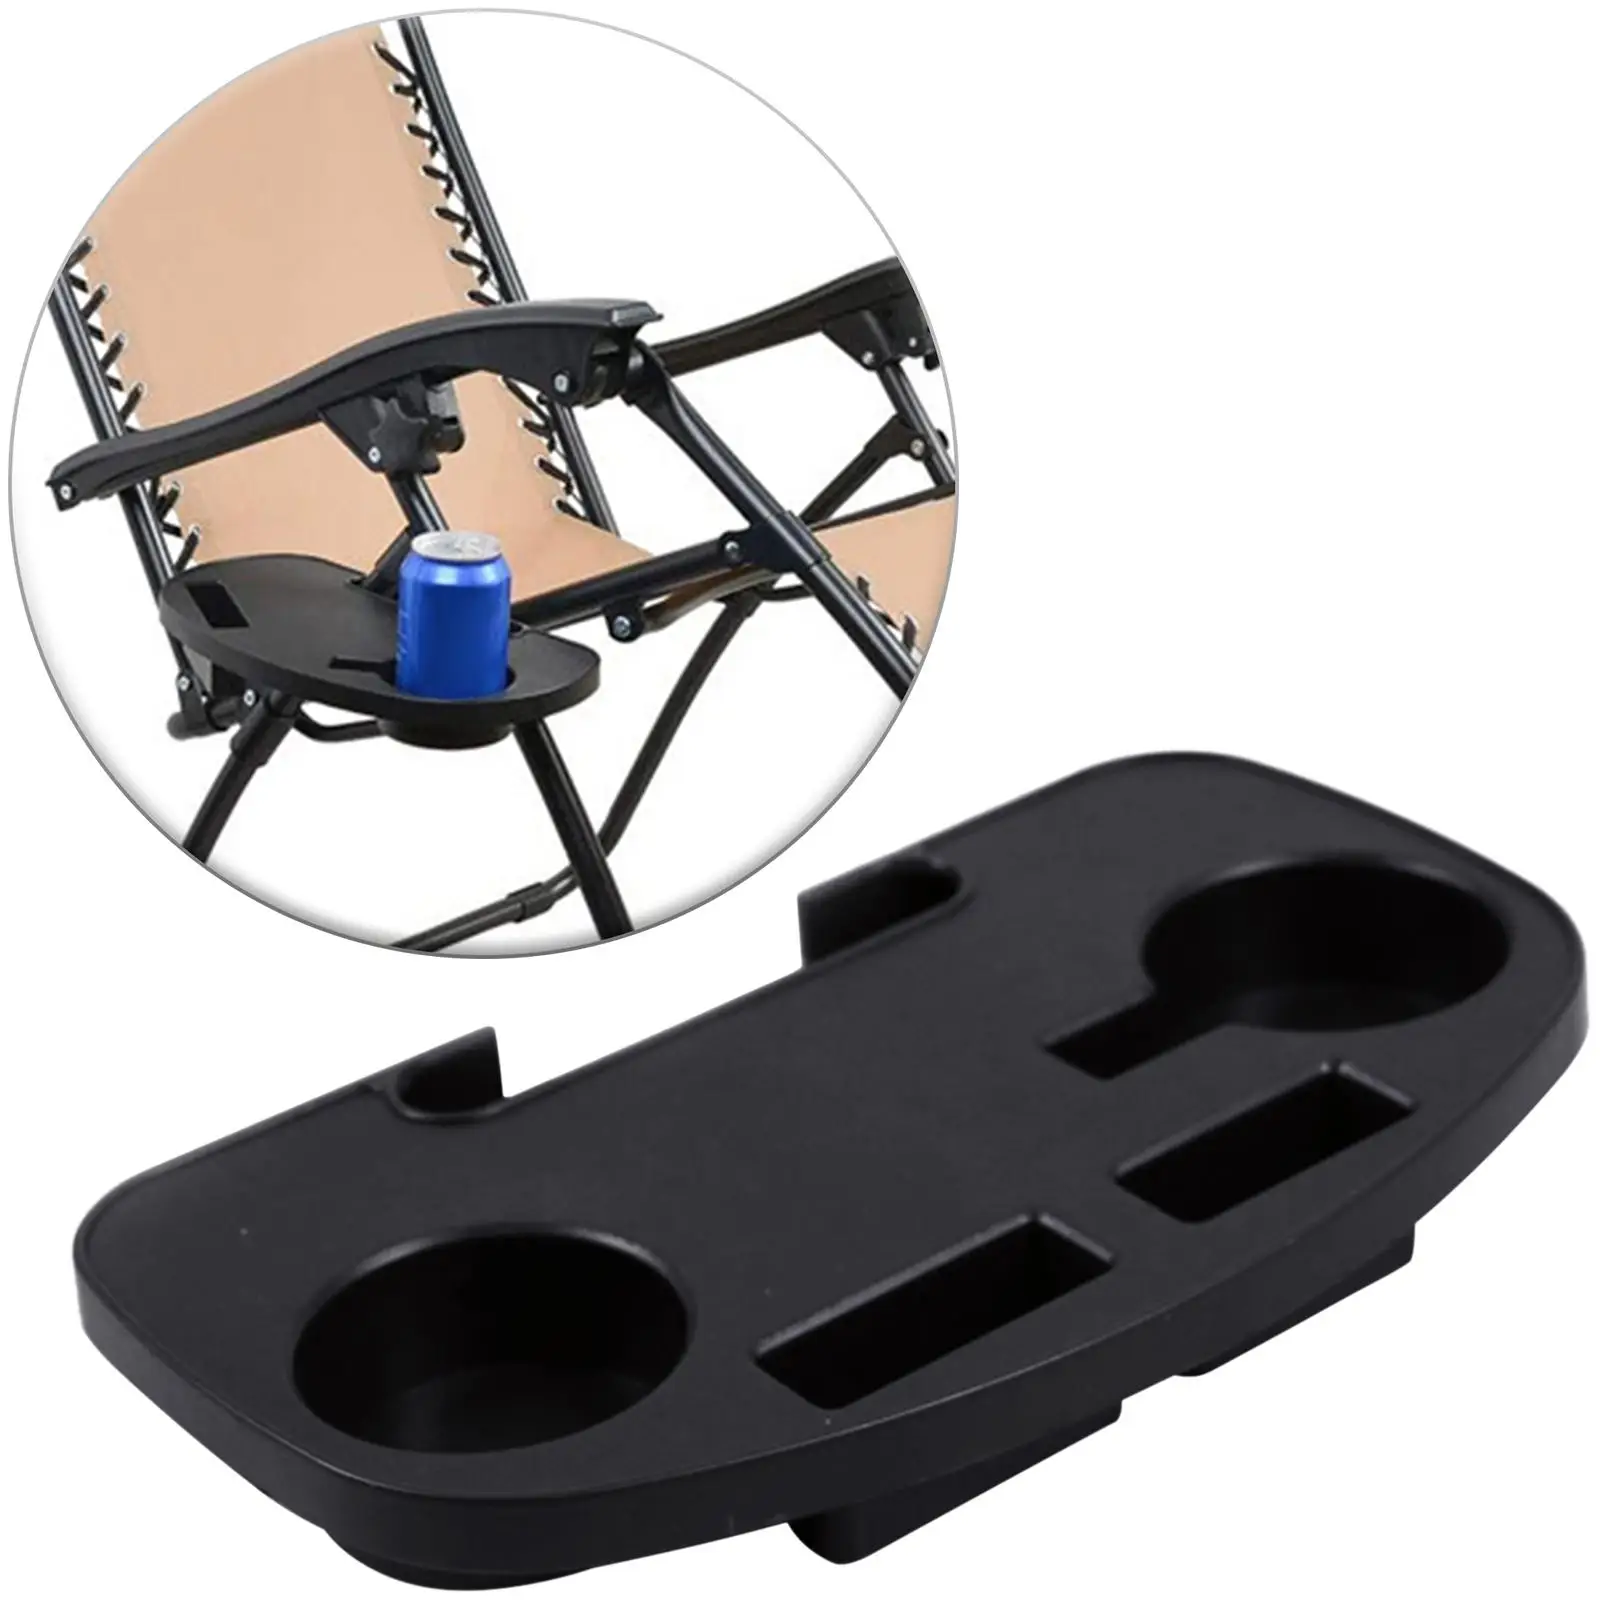 Recliner Side Table Cup Holder Tray Folding Reclining Chairs with Mobile Phone Slot for Sun Lounger Hiking Fishing Camping Beach